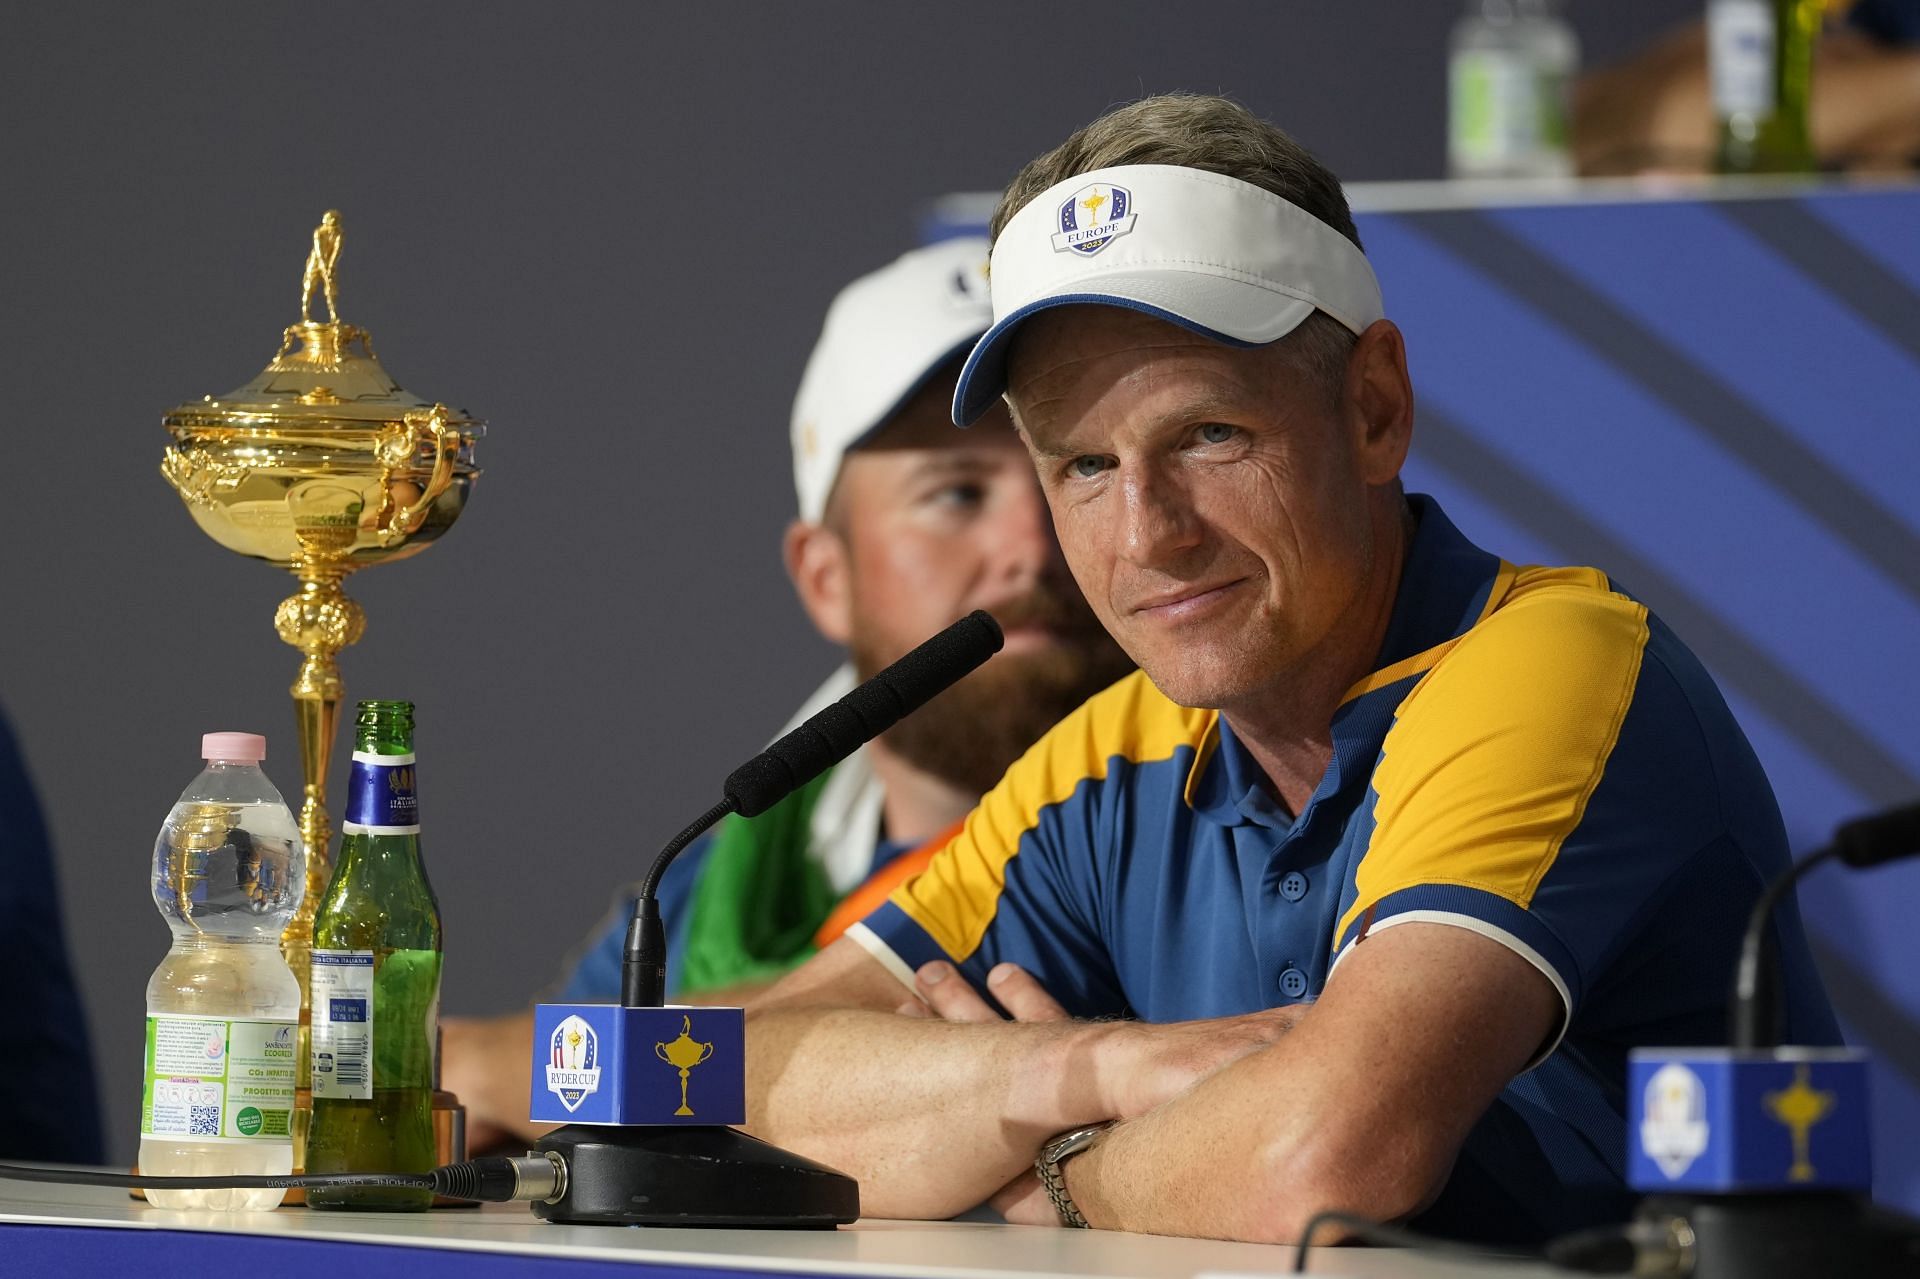 “I couldn’t be happier with the team I’ve got” - Europe Captain Luke Donald optimistic about Team's future after Ryder Cup victory